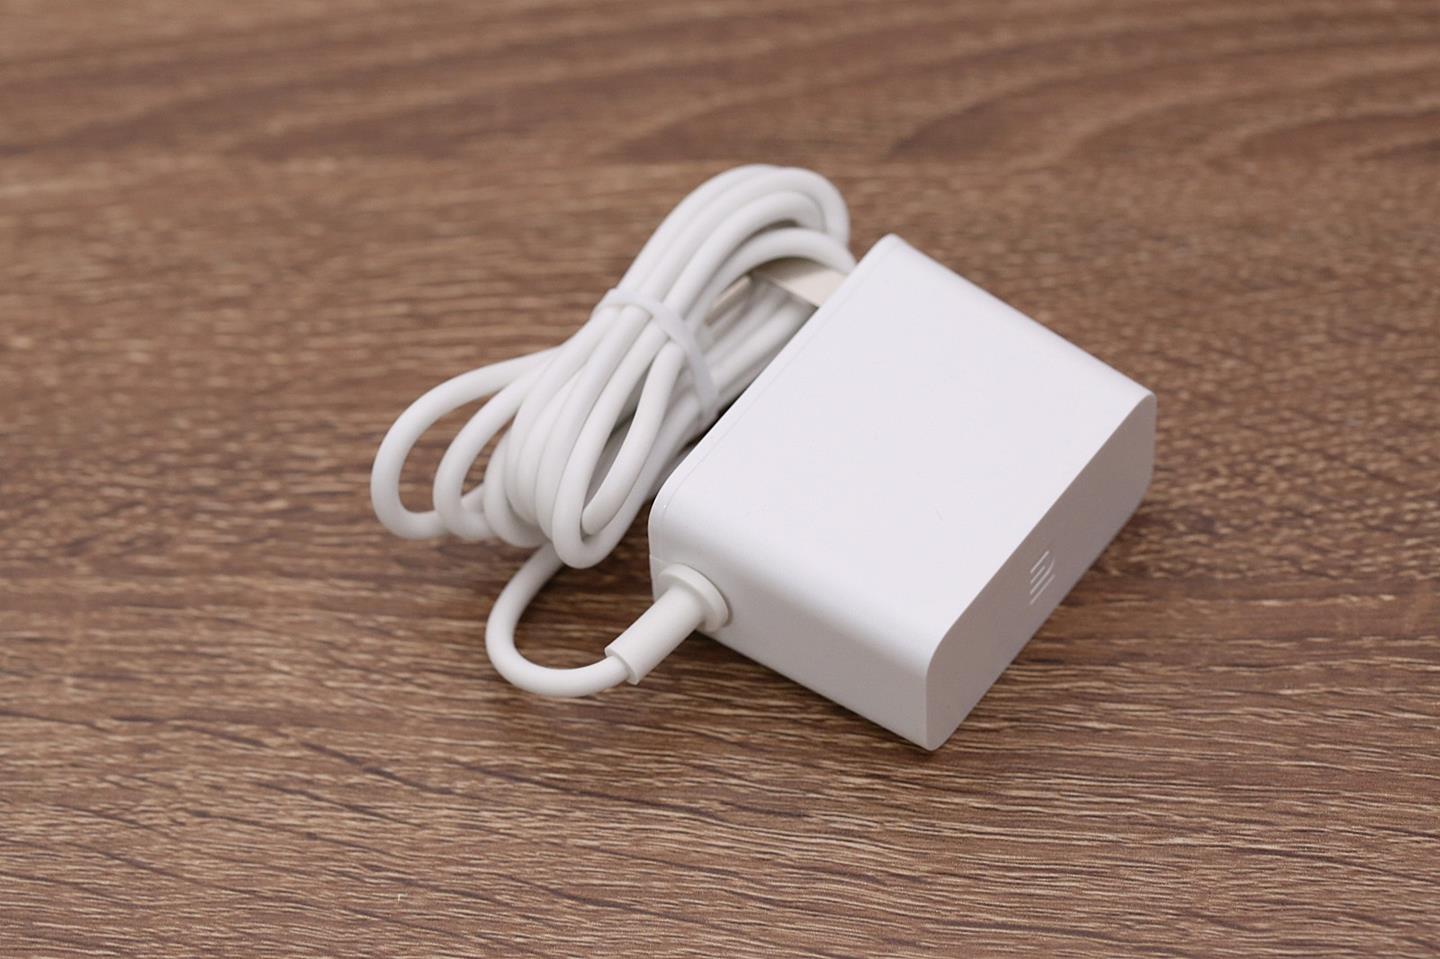 Redmi router AX5 WiFi 6 Review - Power adapter